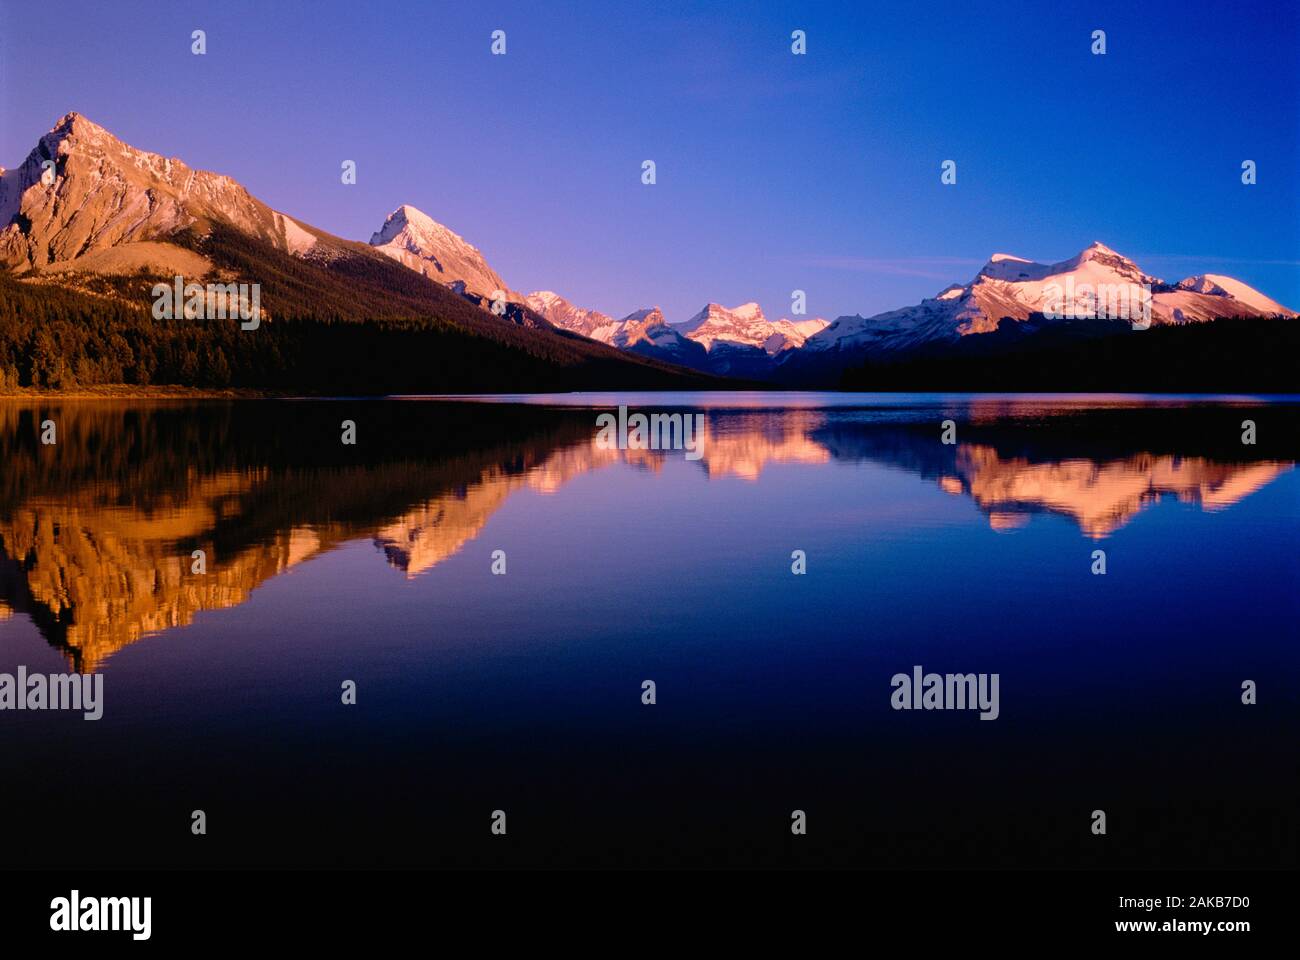 Landscape with Maligne Lake and mountains with reflections, Jasper National Park, Alberta, Canada Stock Photo